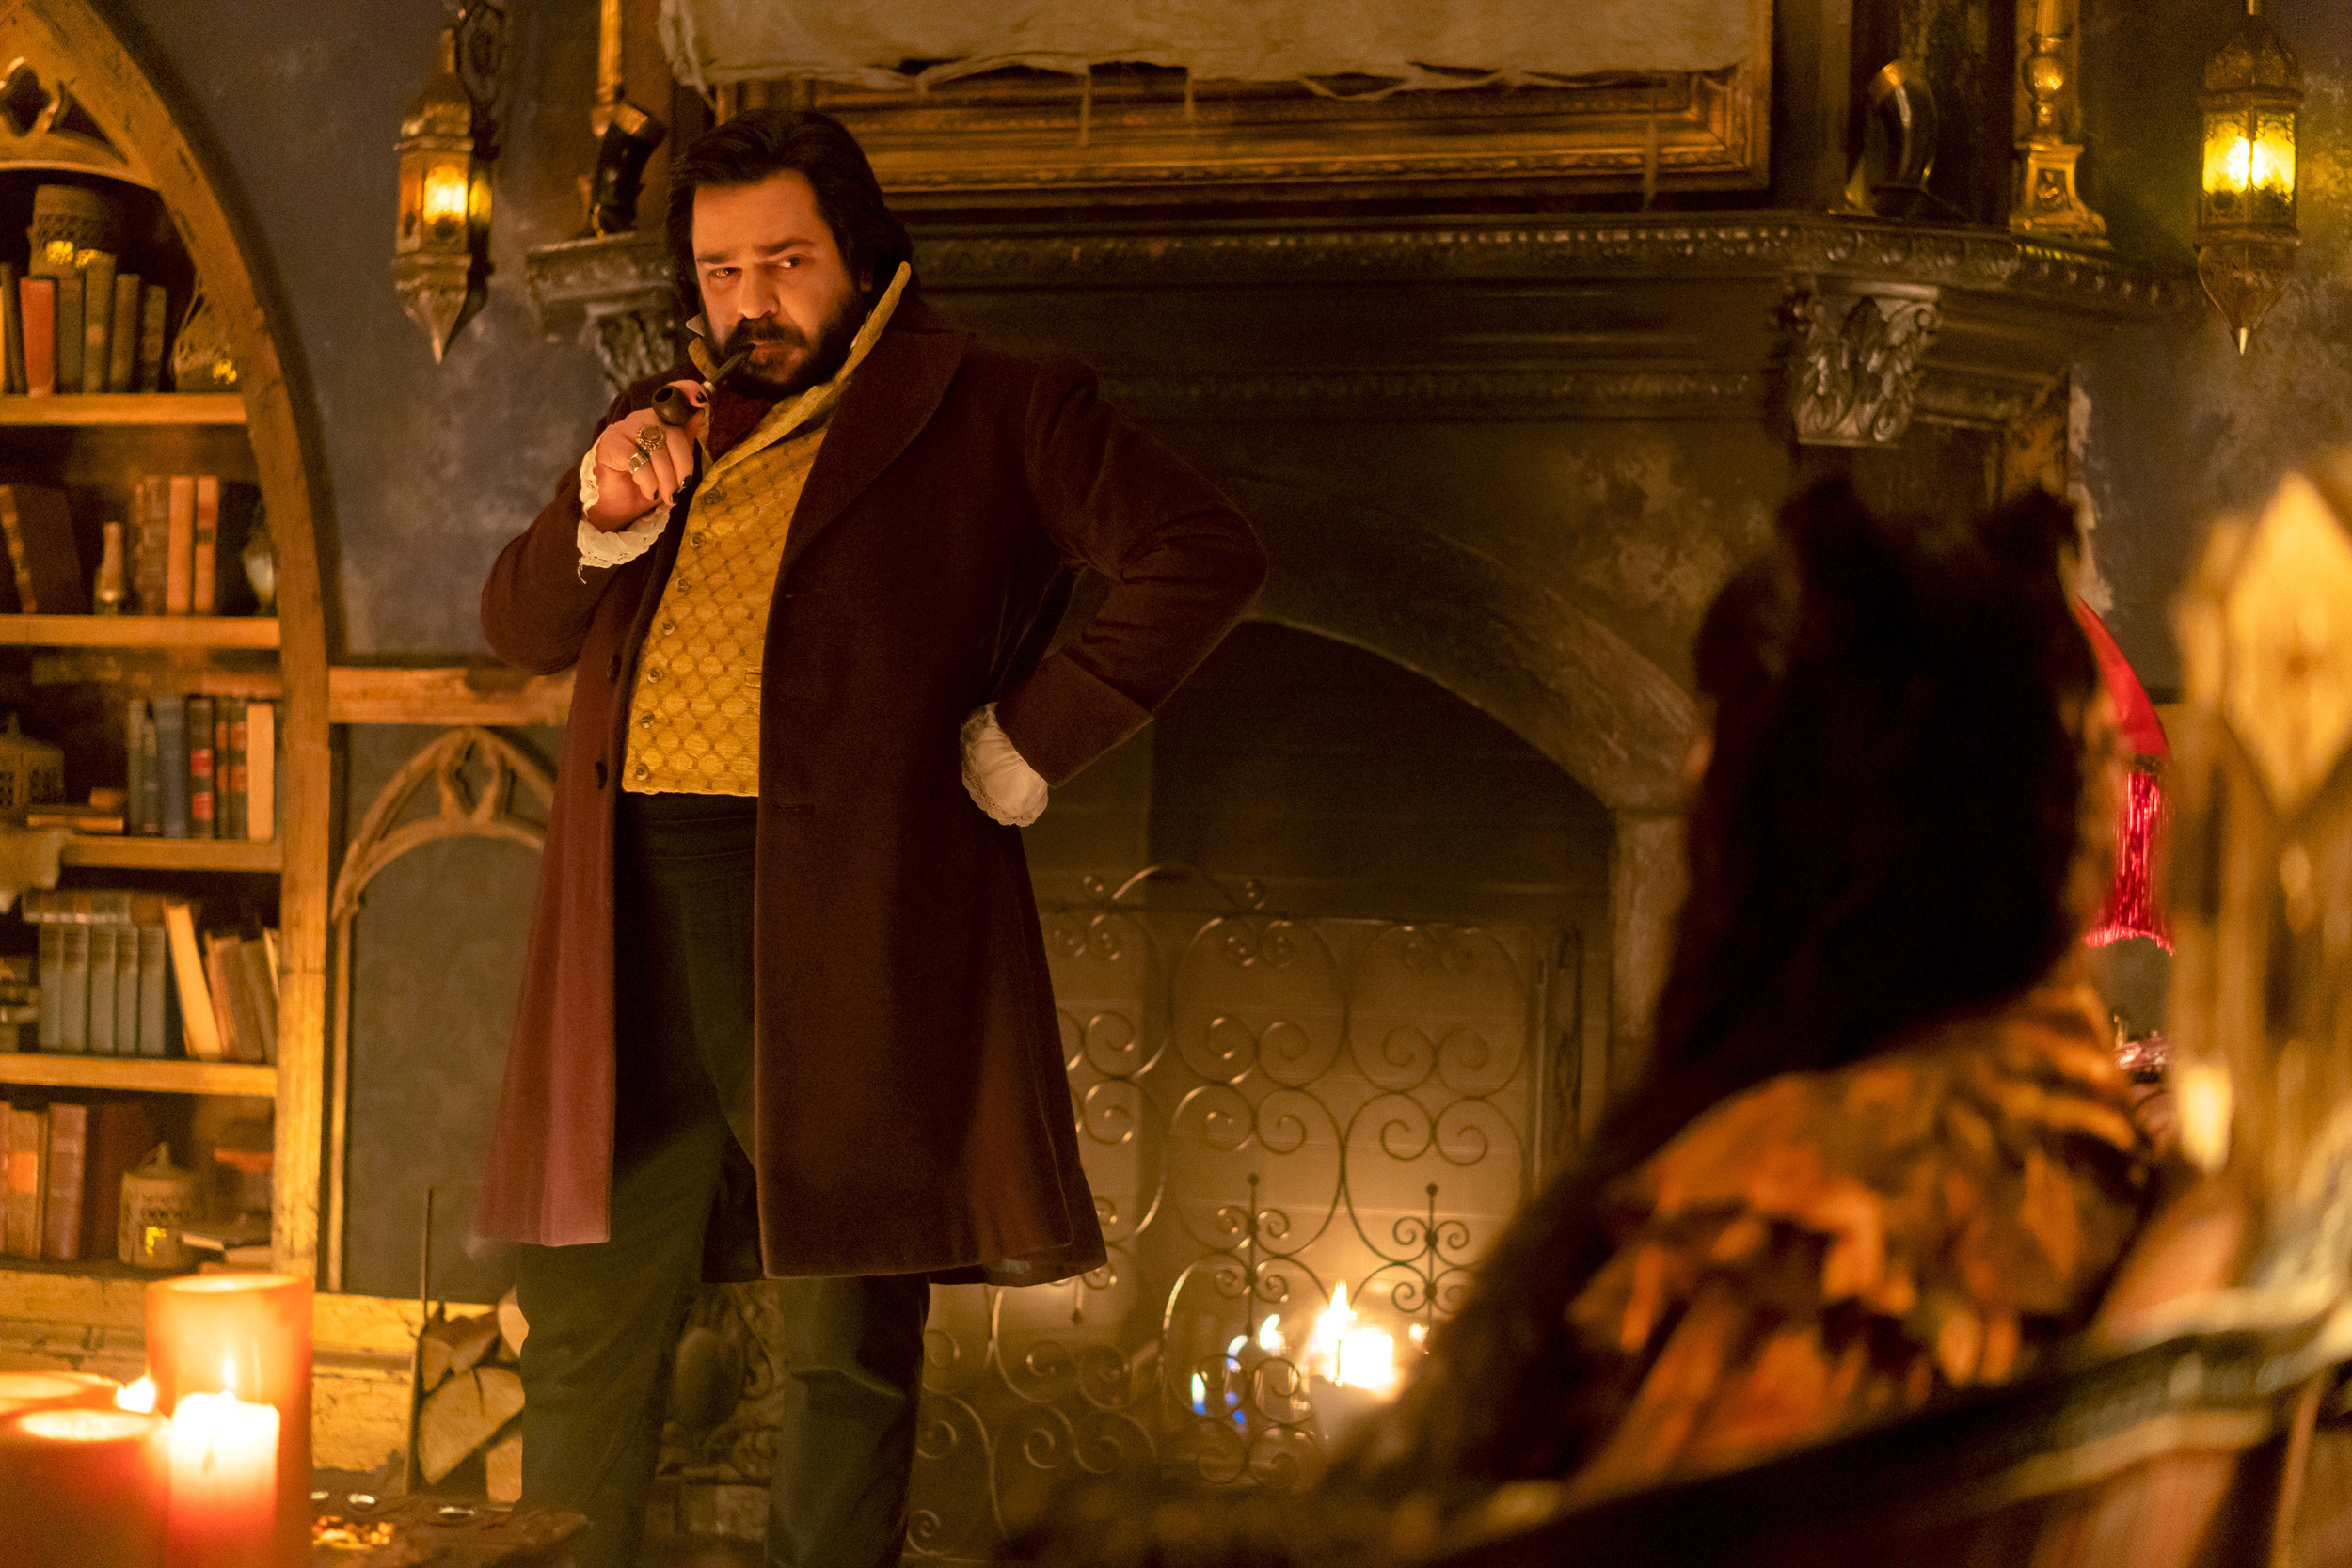 <p>Vampires have long been a fixture in popular culture. While they are often depicted in such genres as horror and gothic drama, in <span><em>What We Do in the Shadows</em>, </span>they get the comedy treatment. Focusing on a group of vampires living on Staten Island, it’s shot in a mockumentary style. From the beginning, the series has leaned into the absurdity of its premise, and there is outstanding chemistry among the various members of the cast. However, while it remains as funny as always, each season also deepens and enriches the relationships among the various characters. </p><p><a href='https://www.msn.com/en-us/community/channel/vid-cj9pqbr0vn9in2b6ddcd8sfgpfq6x6utp44fssrv6mc2gtybw0us'>Follow us on MSN to see more of our exclusive entertainment content.</a></p>